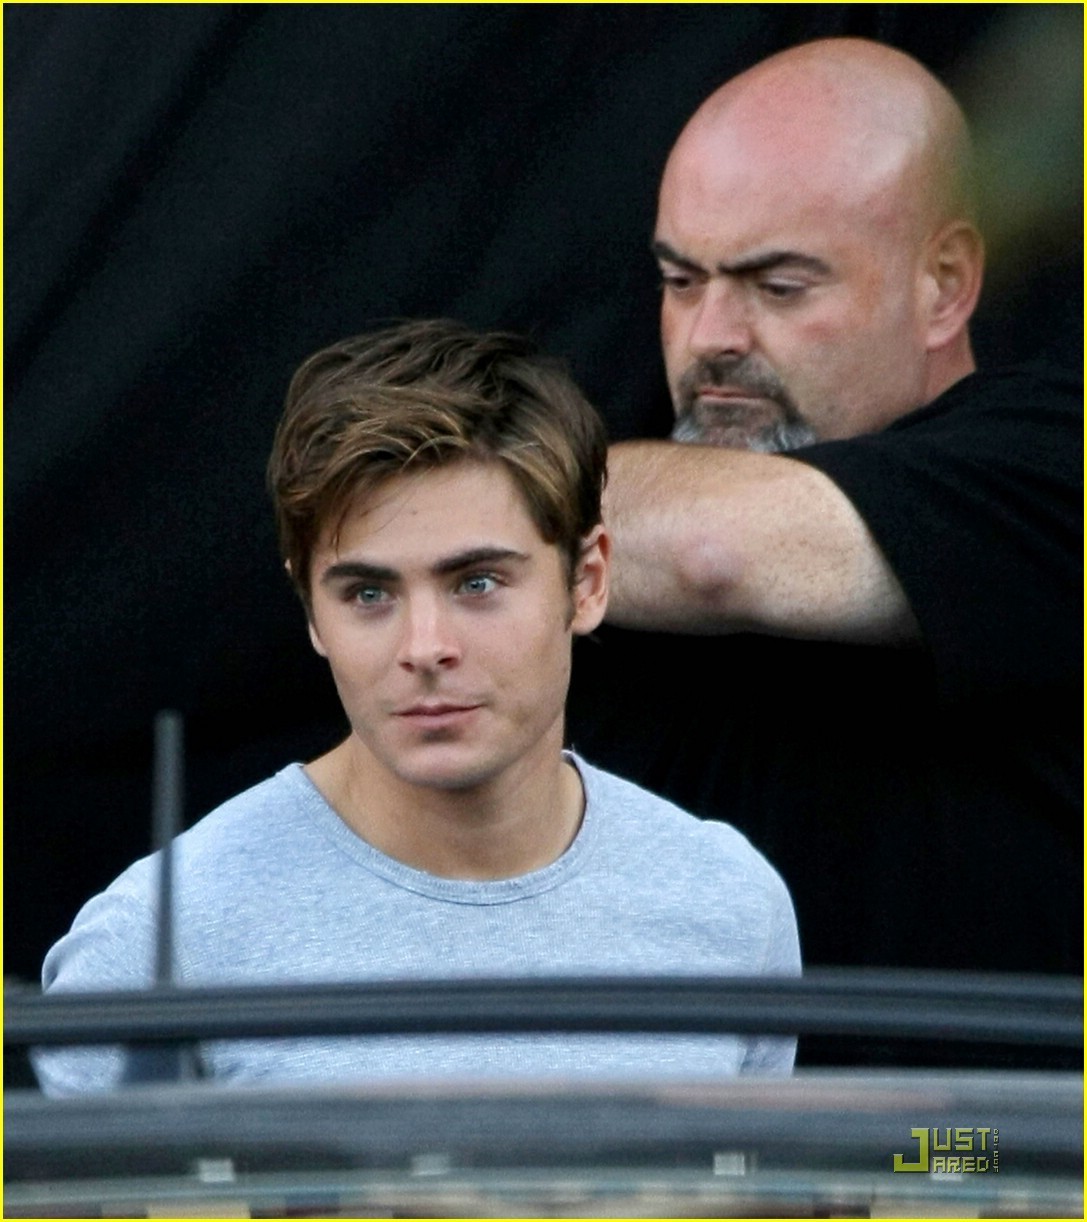 Zac Efron leaves The Death & Life of Charlie St. Zac-Efron-leaves-The-Death-Life-of-Charlie-St-Cloud-set-in-Vancouver-September-25th-zac-efron-8336066-1087-1222